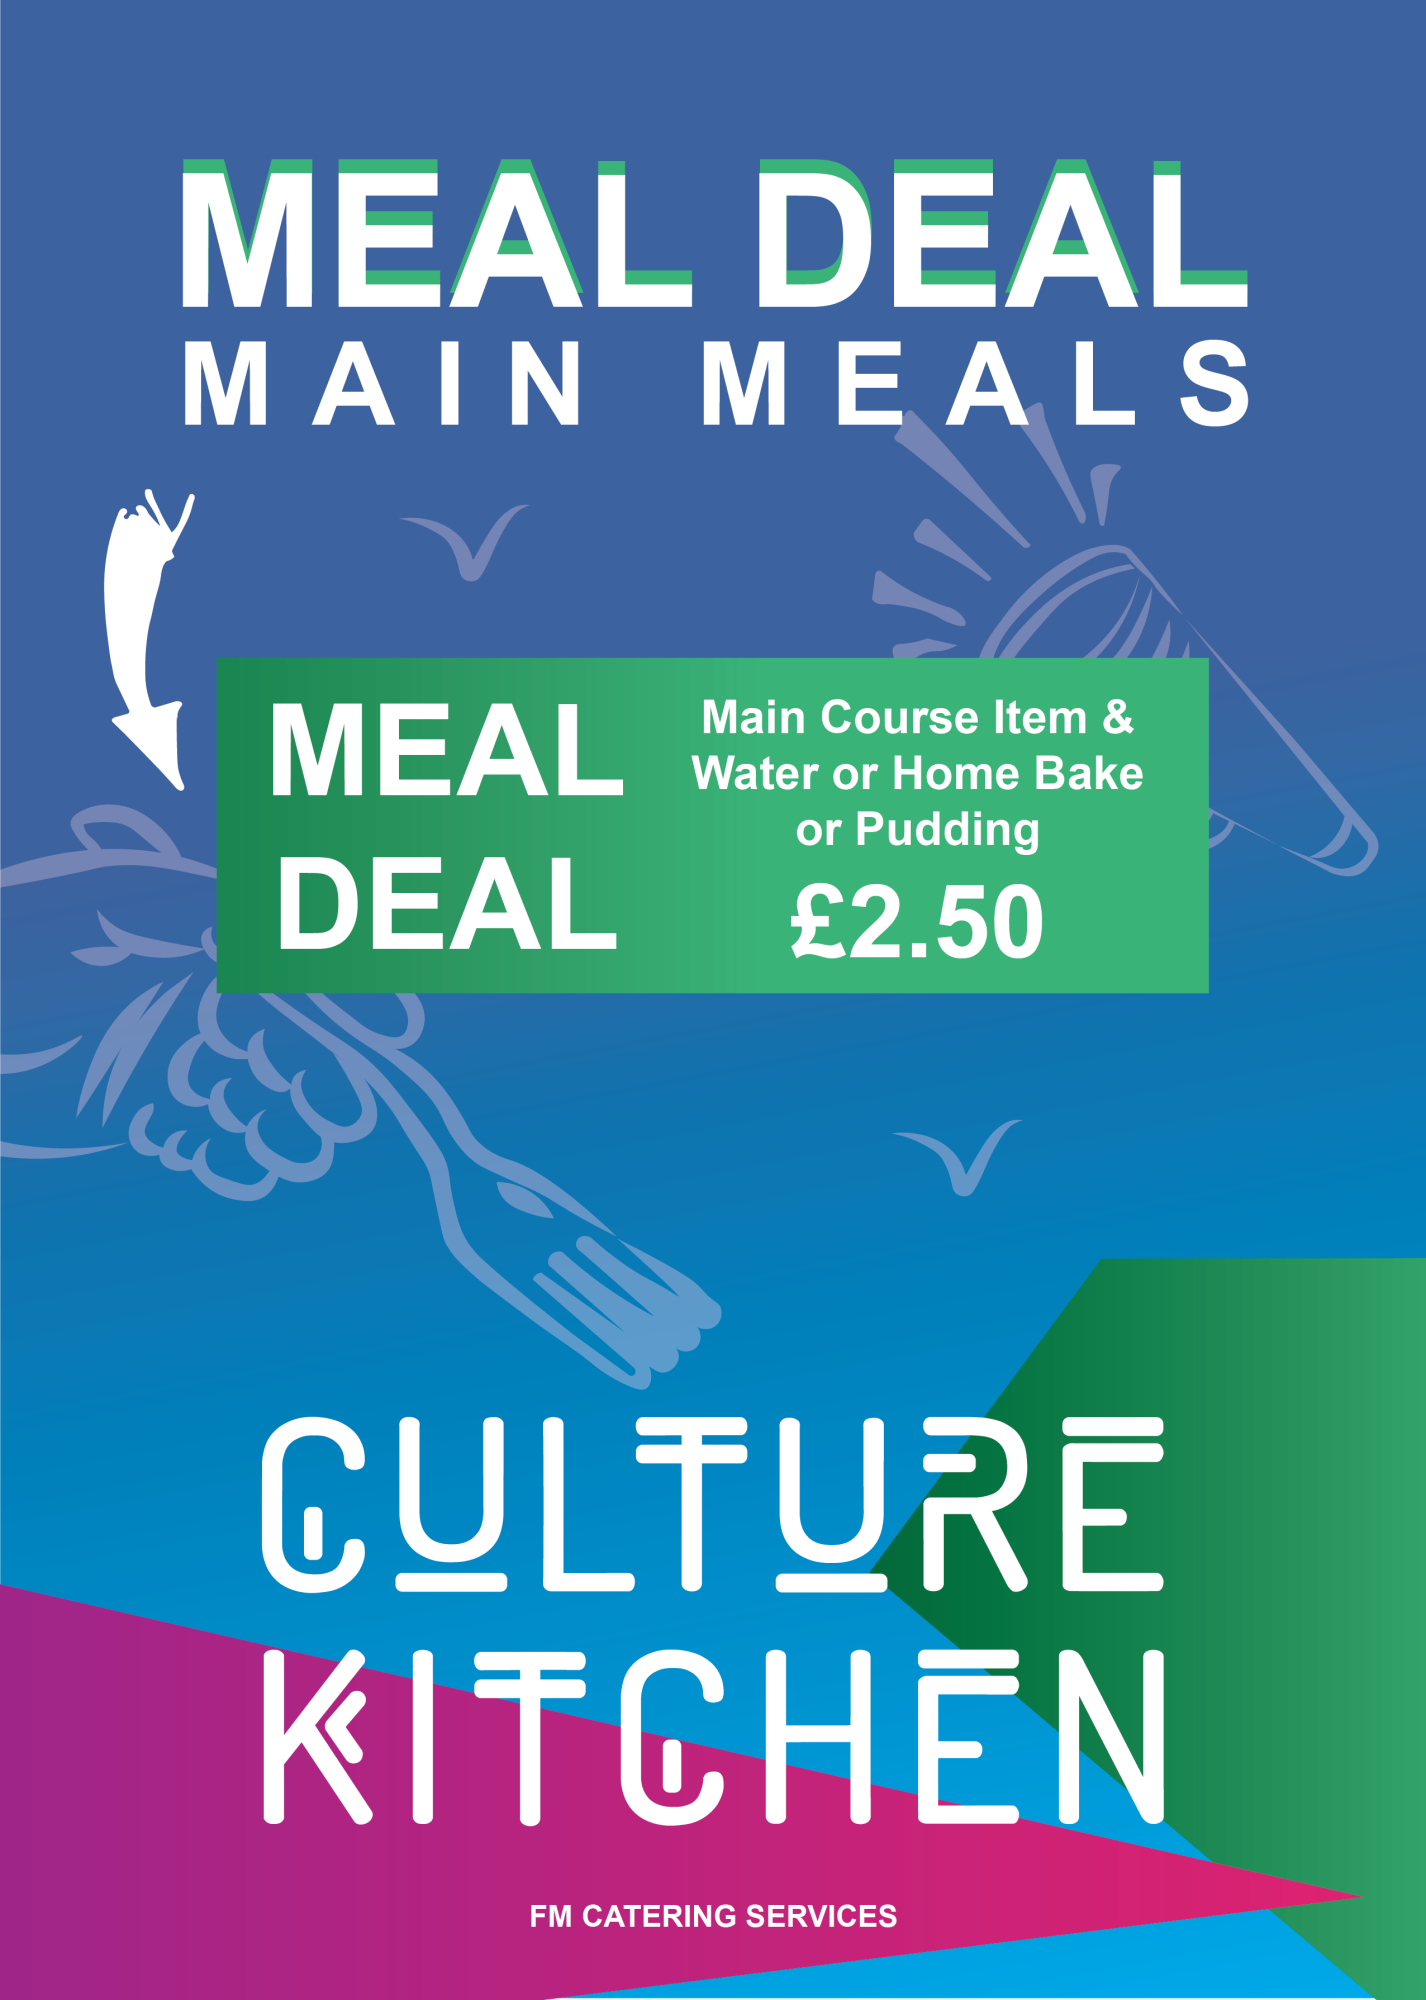 Meal Deal Poster Designs (2)-02